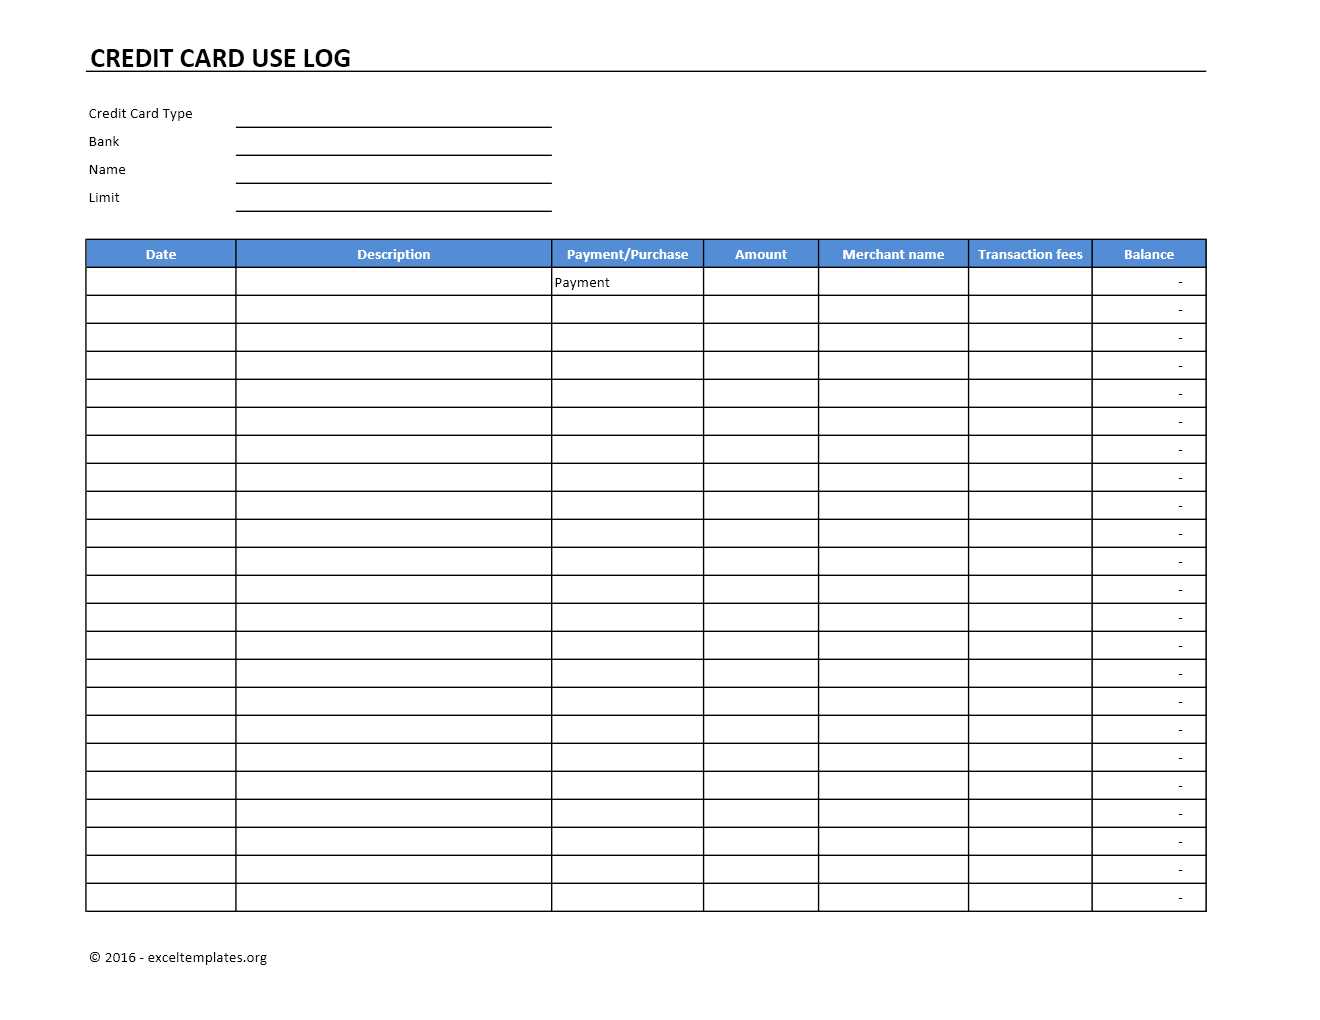 Credit Card Use Log Excel Template